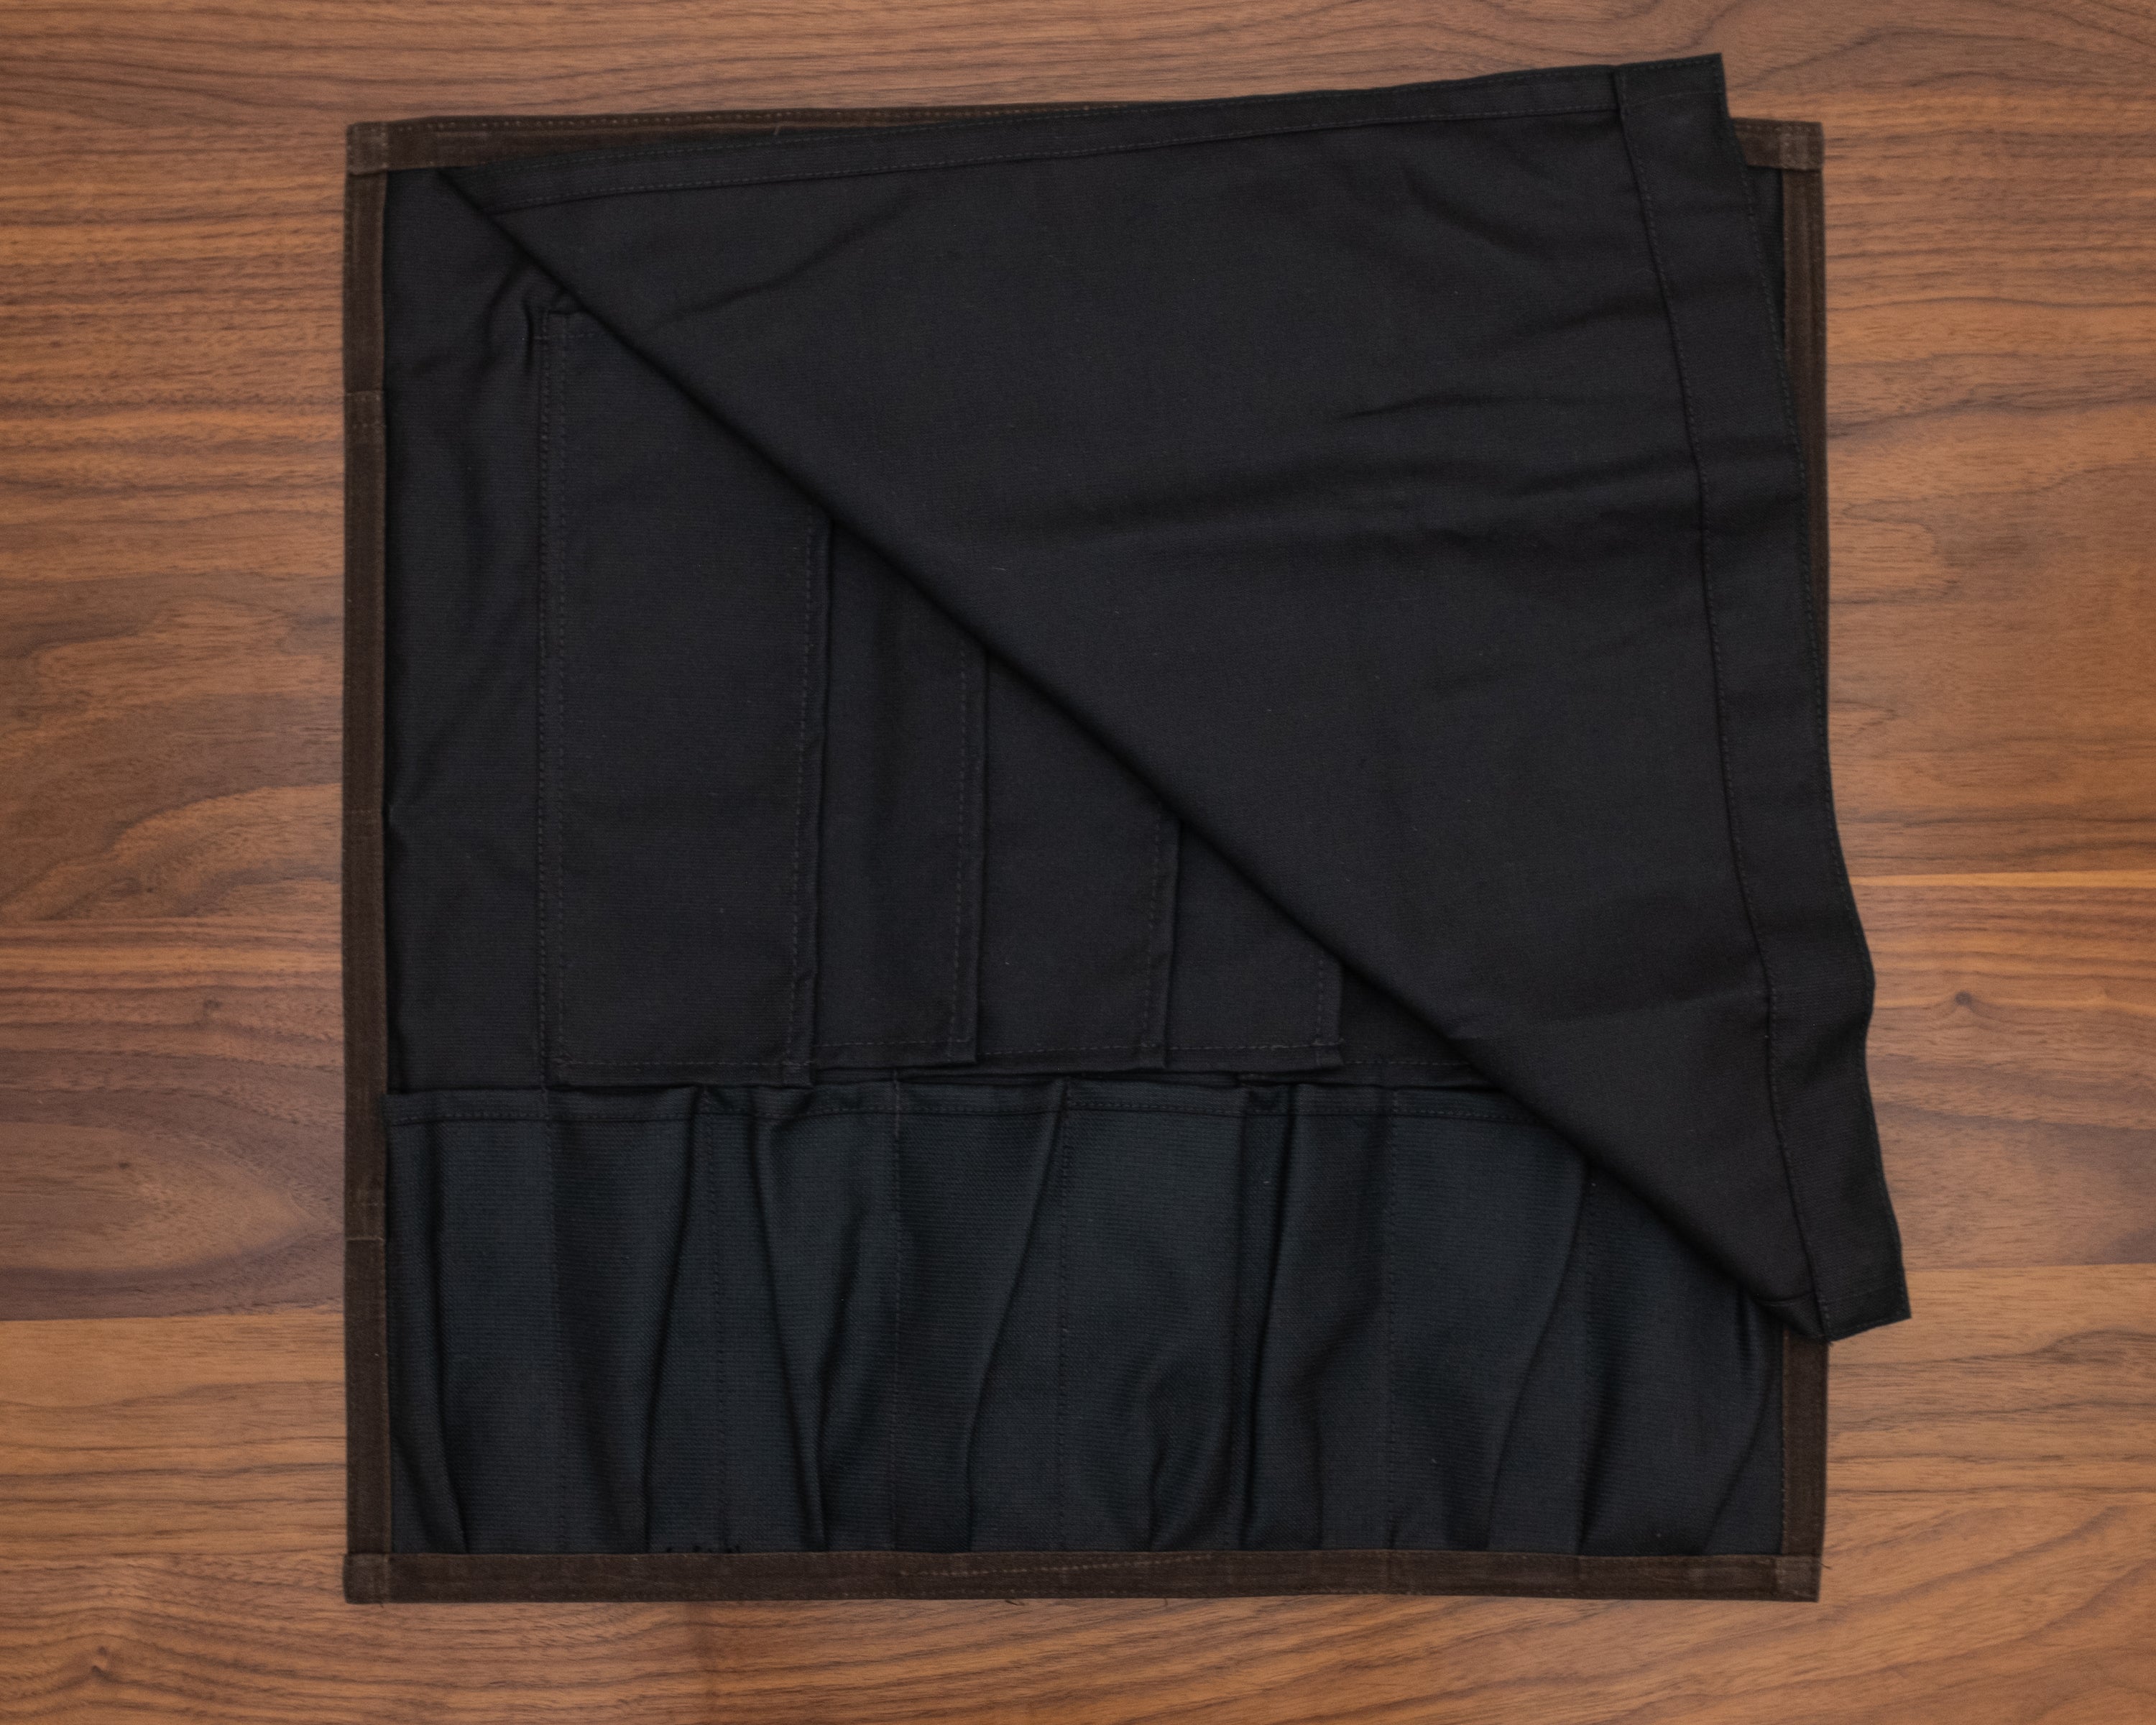 Black interior of the Main Squeeze dark oak knife roll laid out flat on a wooden surface. The interior is made of a 50-50 Kevlar/Nomex blend for long lasting protection. Design by Craftmade Aprons in Minnesota.